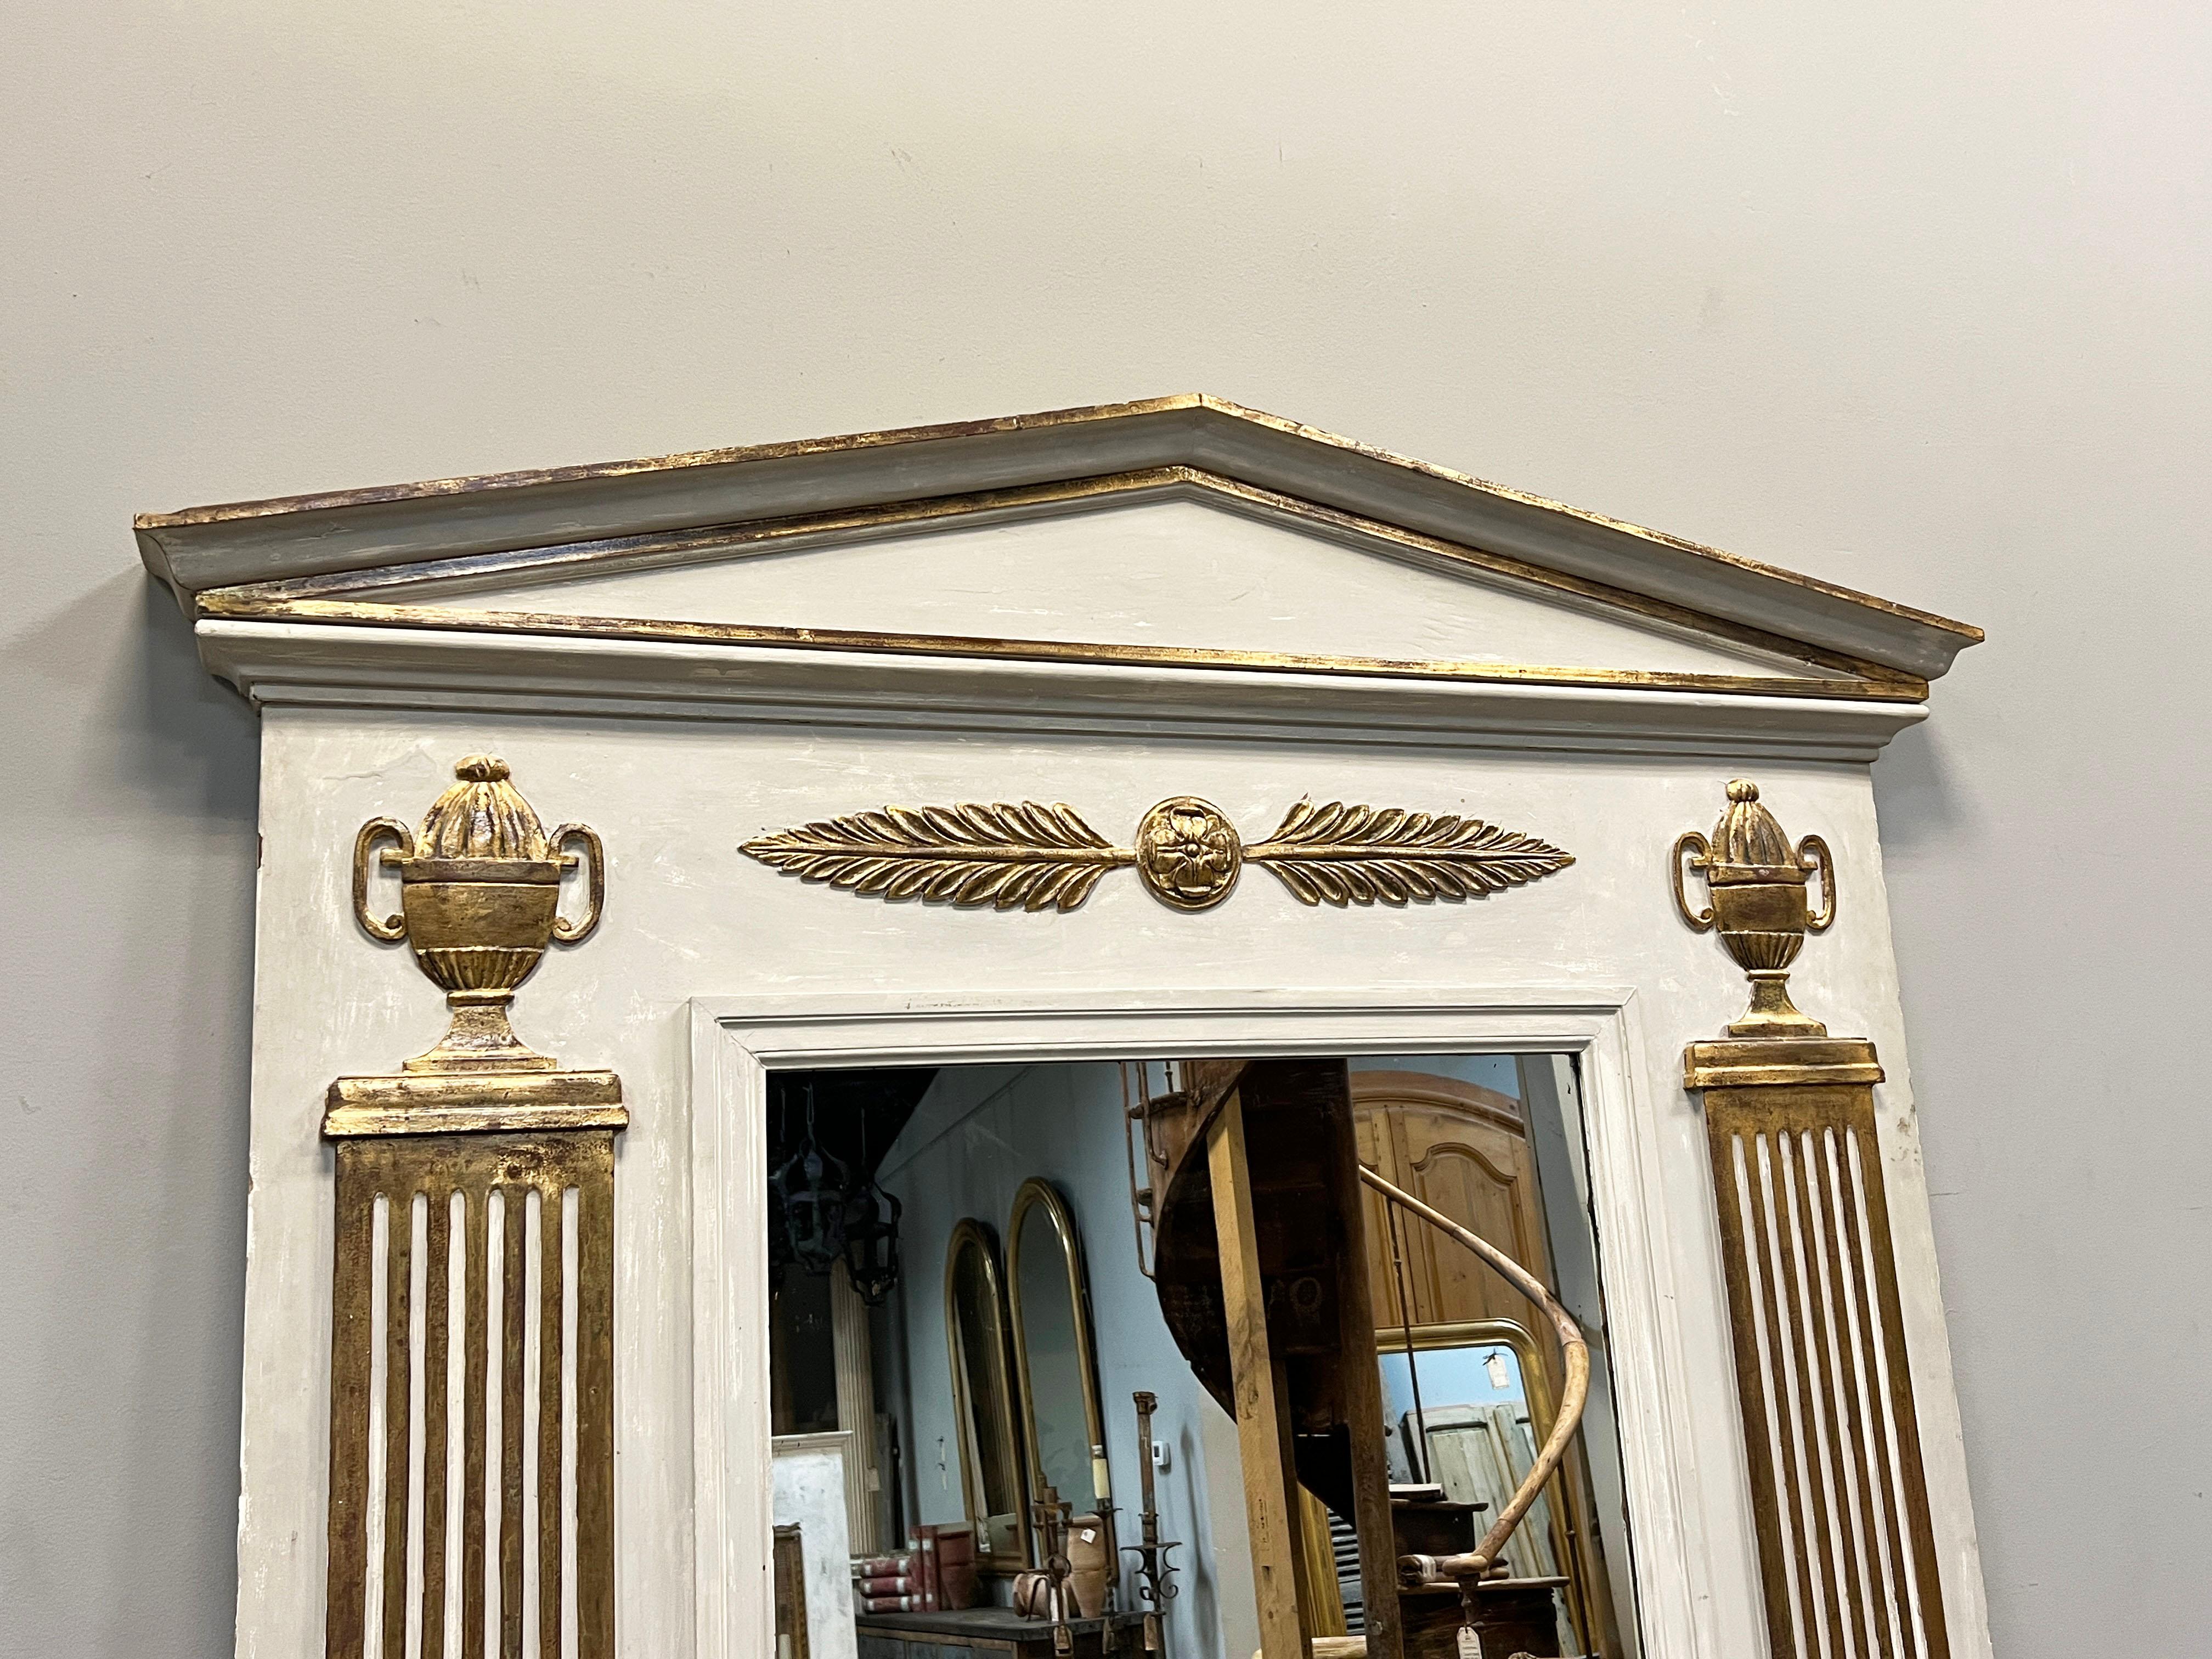 This is an impressive classically styled yet restrained overmantel mirror and frame, painted with gilded decorative elements. Fluted pilasters are topped with a classical urn with pediment echoing the classical Empire style.

Mirror frame likely